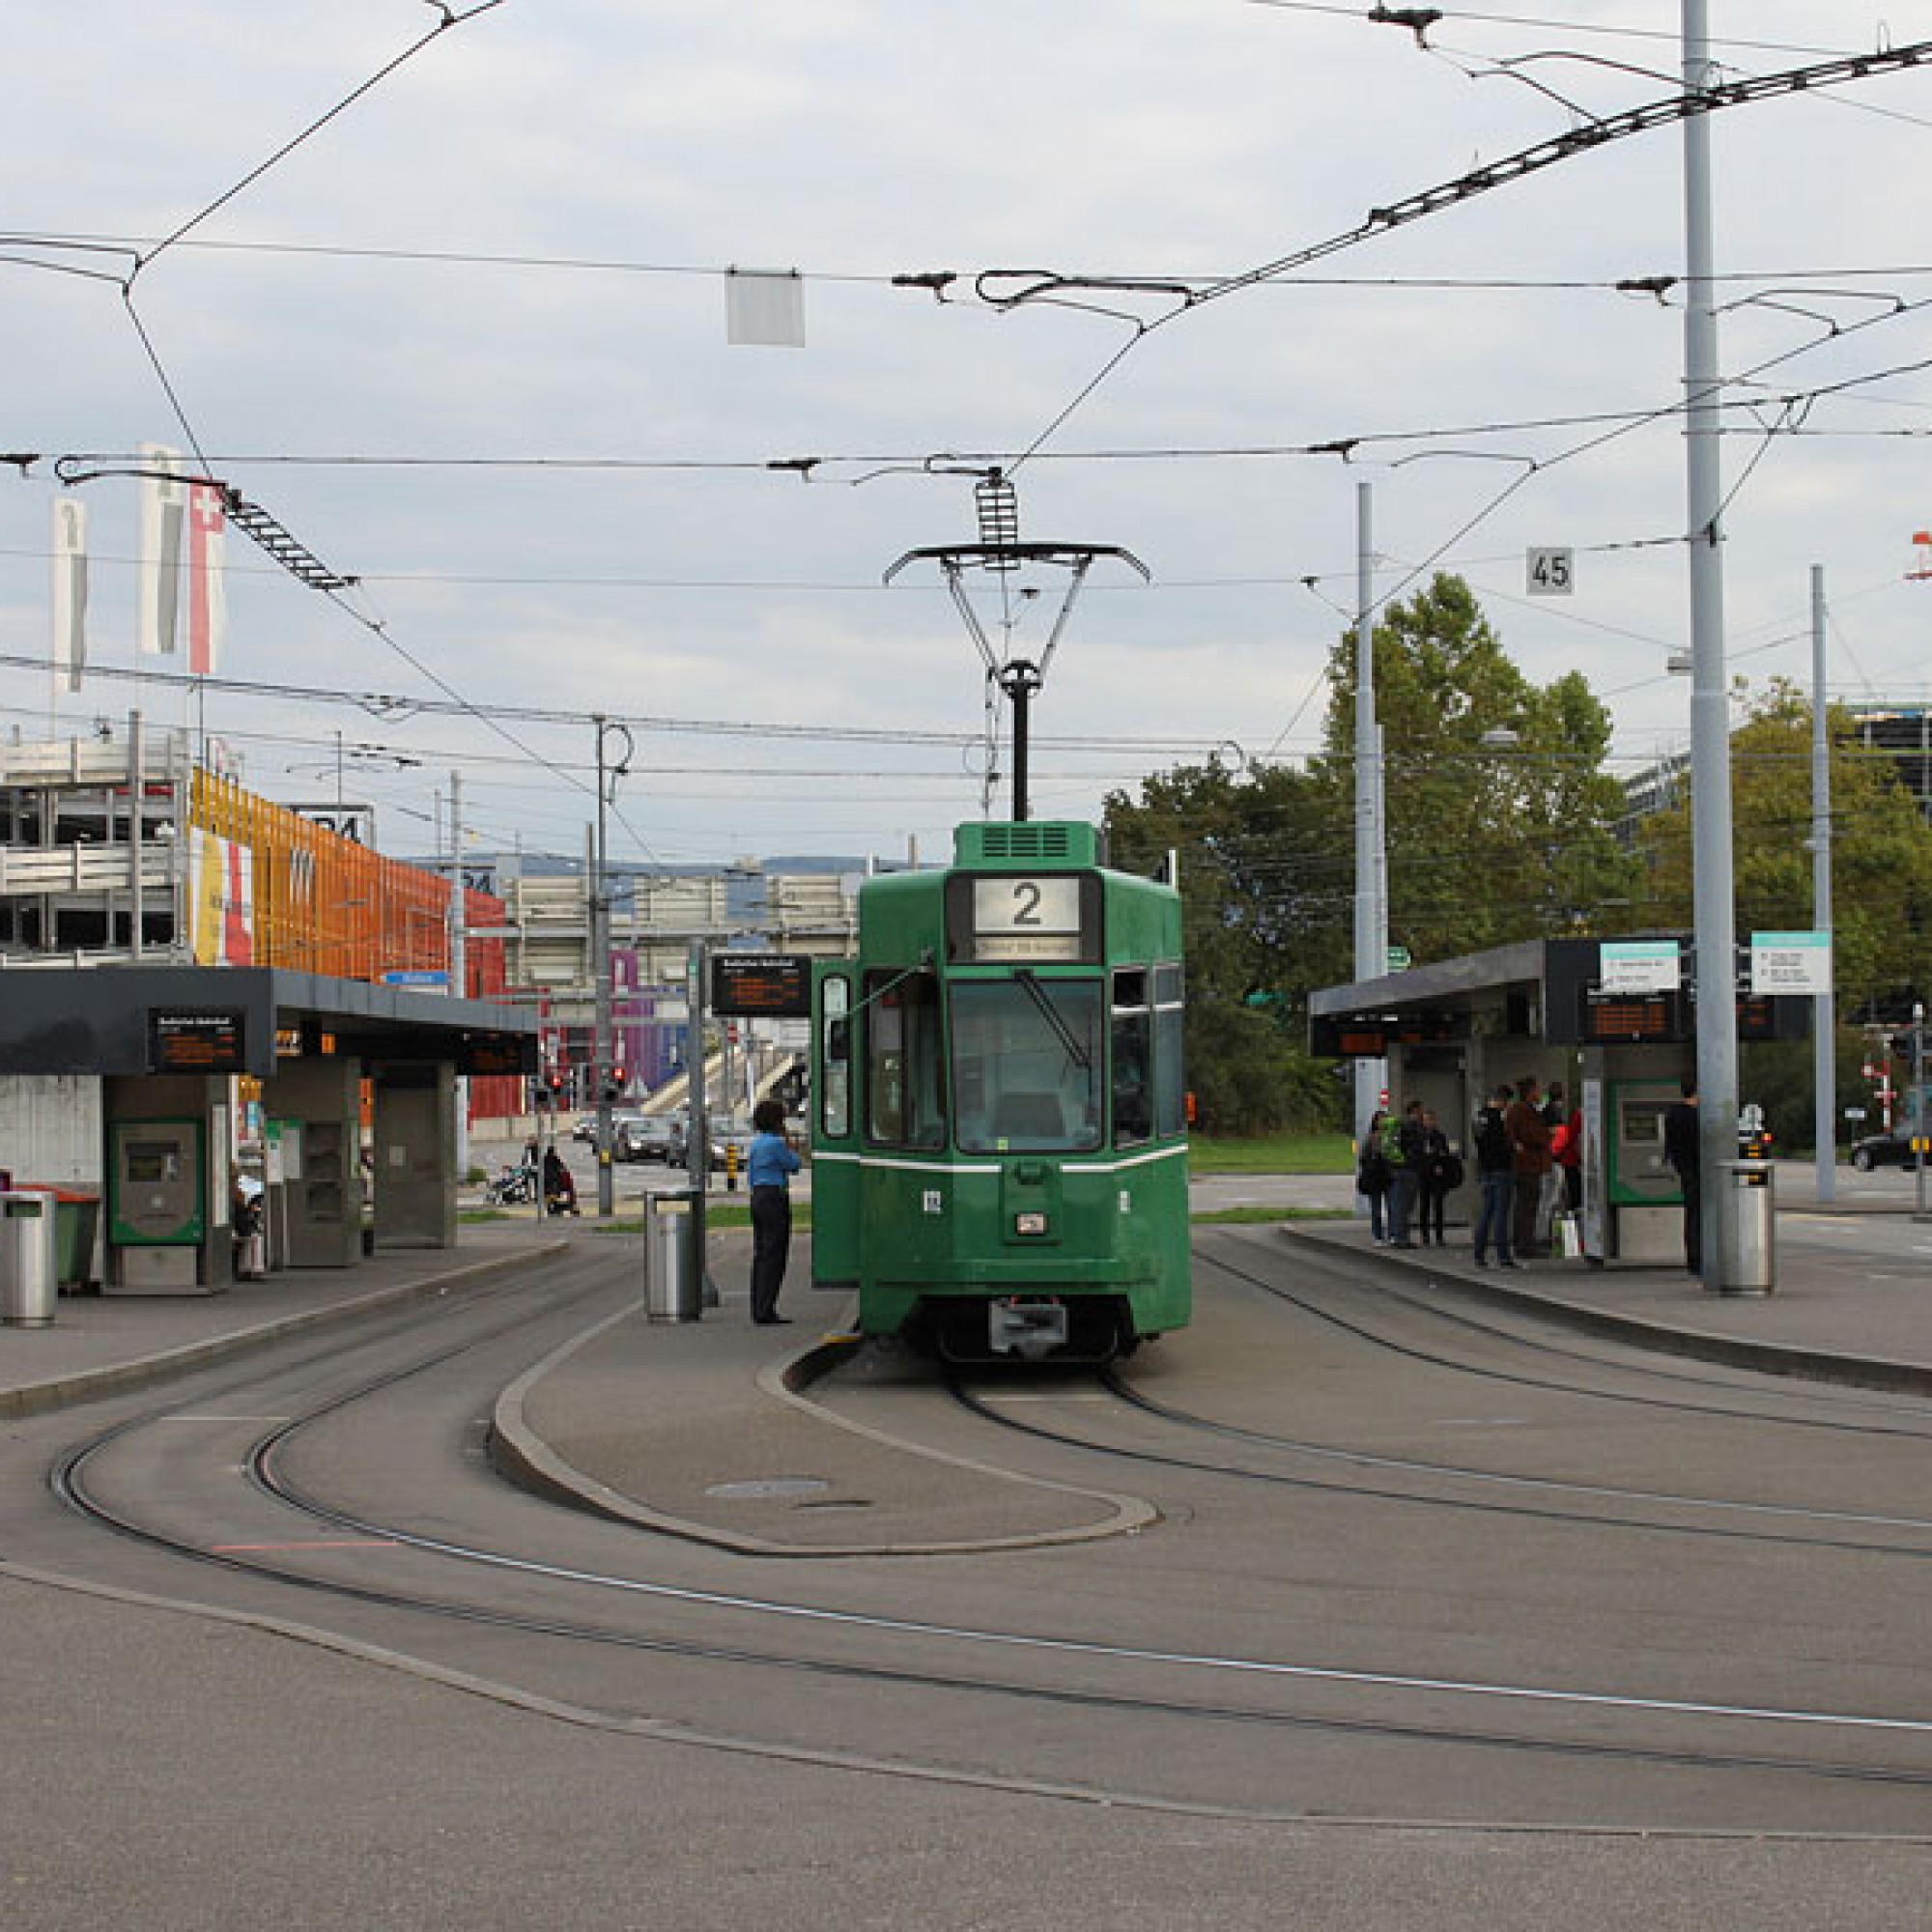 Tramhaltestelle in Basel (NAC, CC-BY-SA 4.0, Wikimedia Commons)